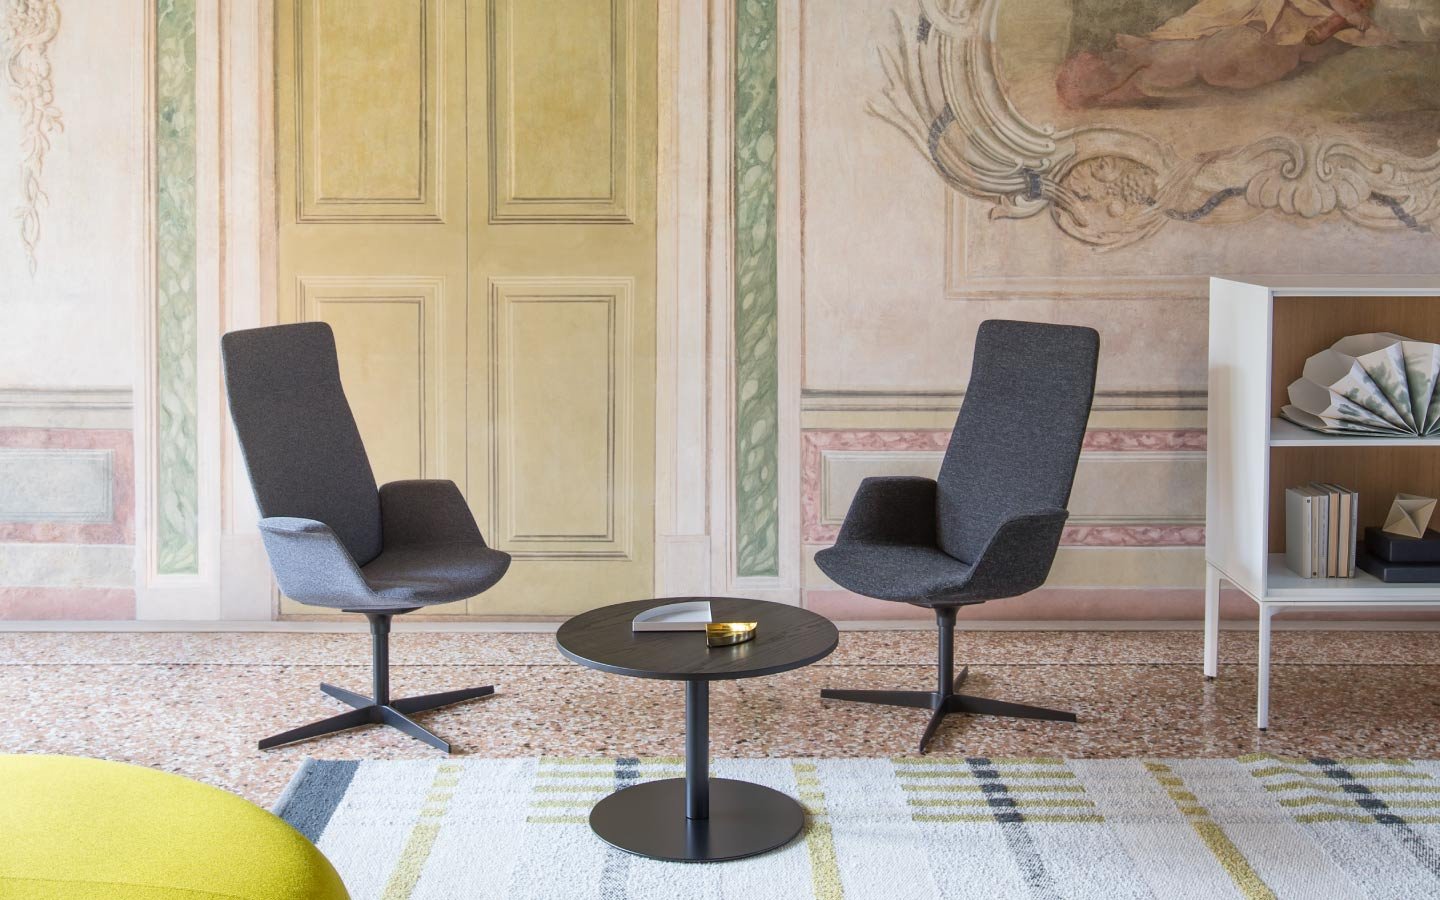 Uno Lounge Chair office from lapalma, designed by Francesco Rota